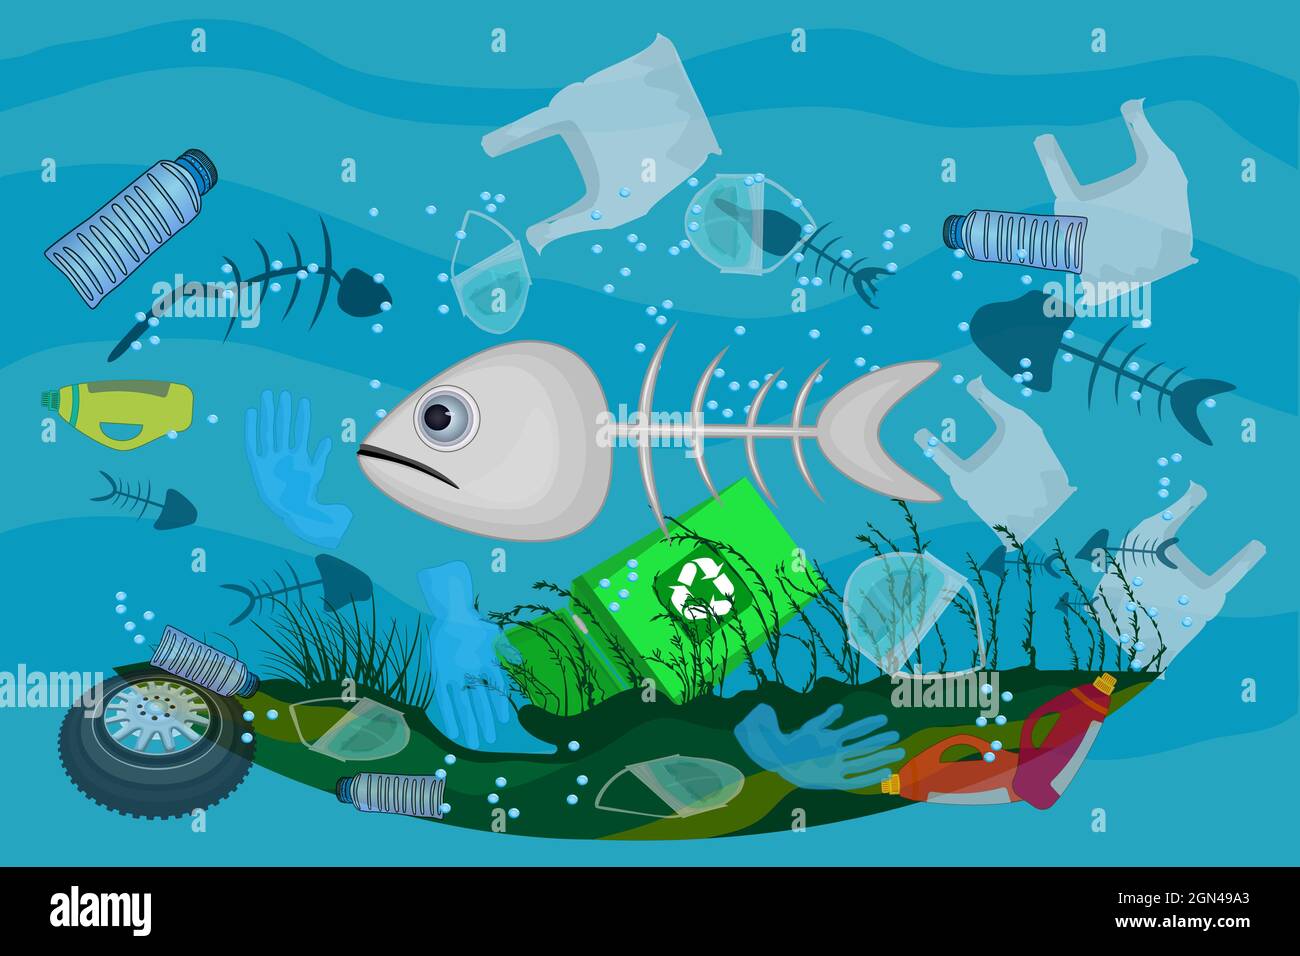 Poster with ocean pollution with litter in ocean, dead sea, dirty water, fish bones, face masks, plastic bottles and bags. Stock vector illustration Stock Vector